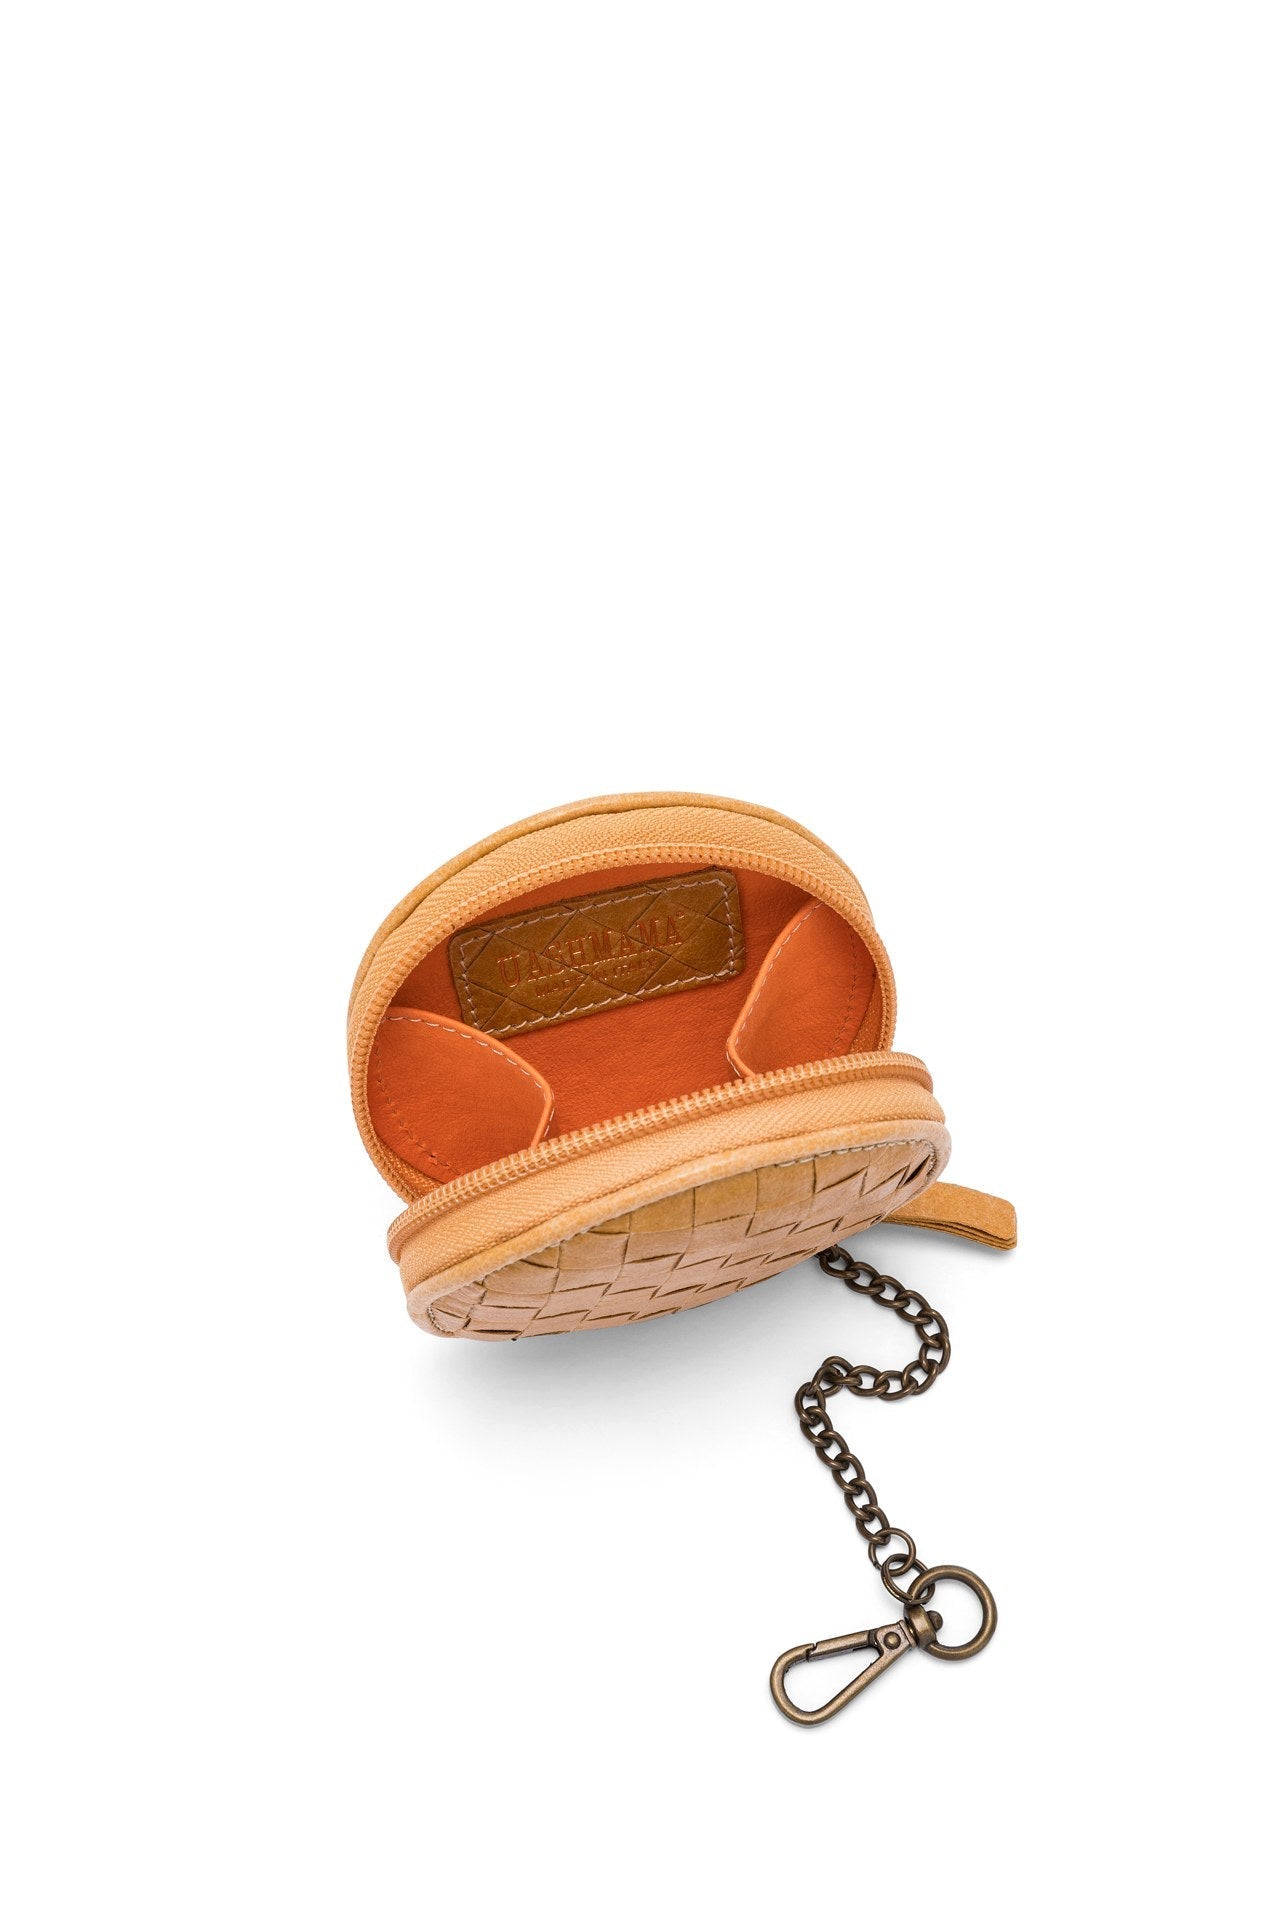 A tan woven washable paper round coin purse is shown from the front at a top-down angle. It features an orange interior and a brown UASHMAMA logo stamp on the inside.